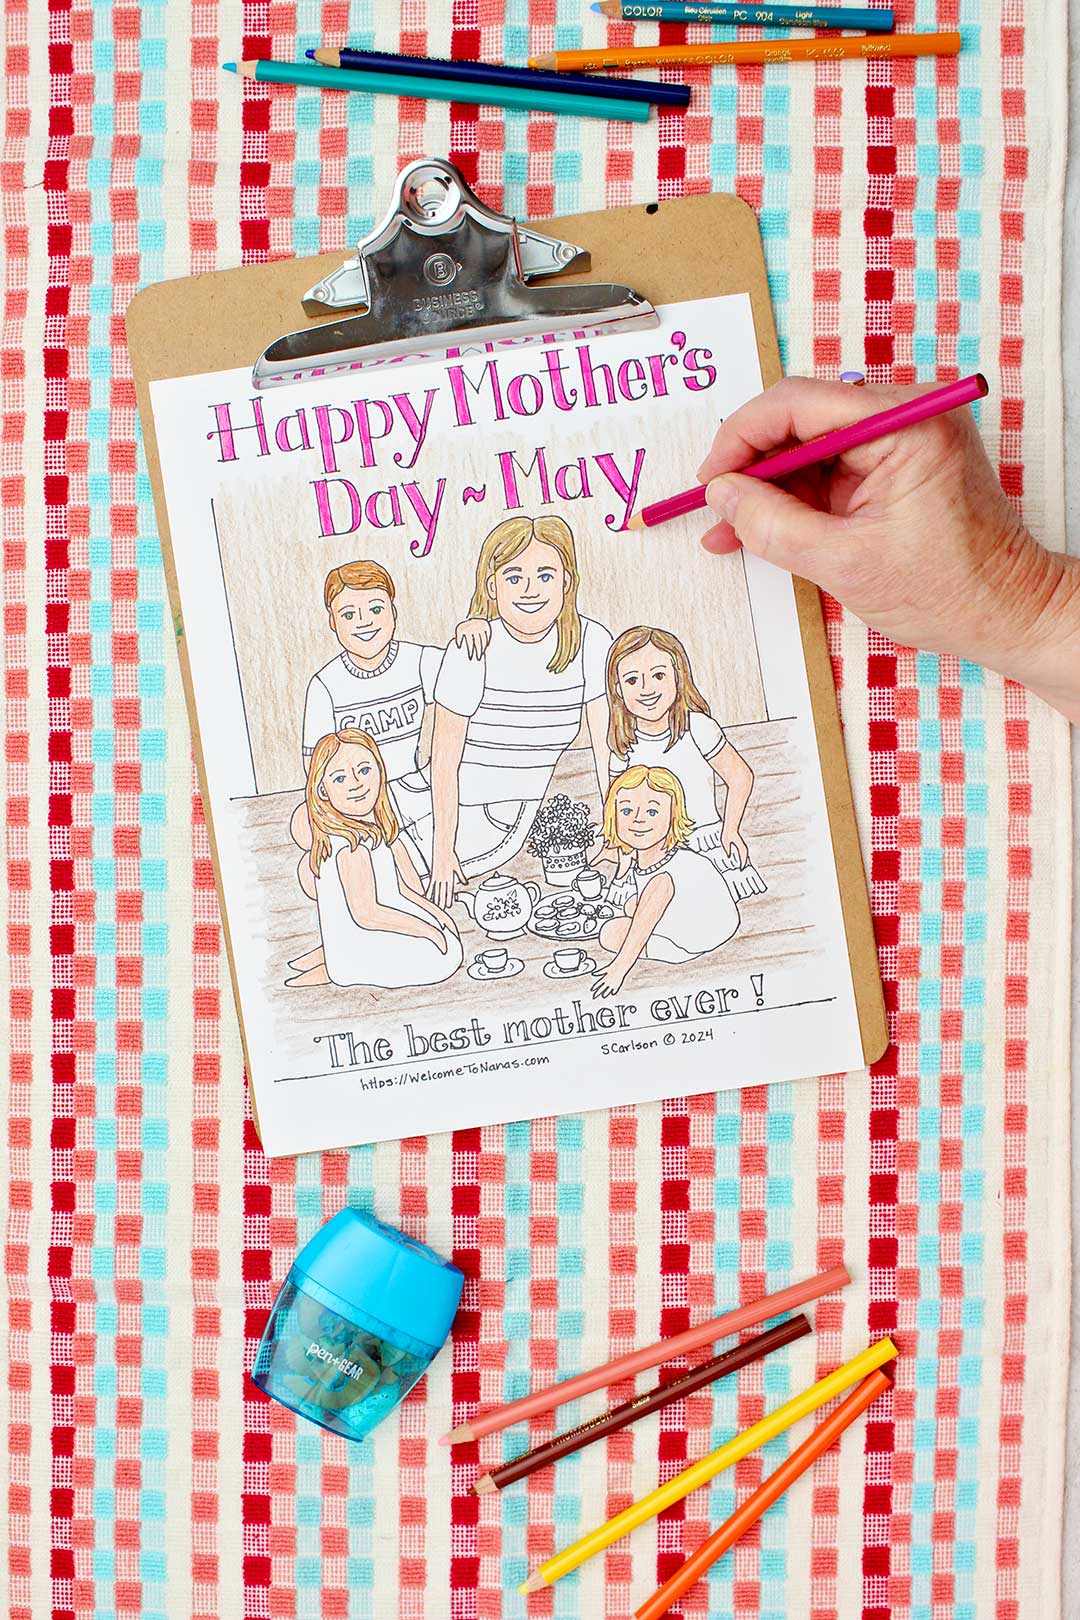 Hand coloring text pink on Mother's Day Coloring page of a mom and kids having a tea party clipped into clip board and resting on a red, coral and aqua towel with colored pencils near by.